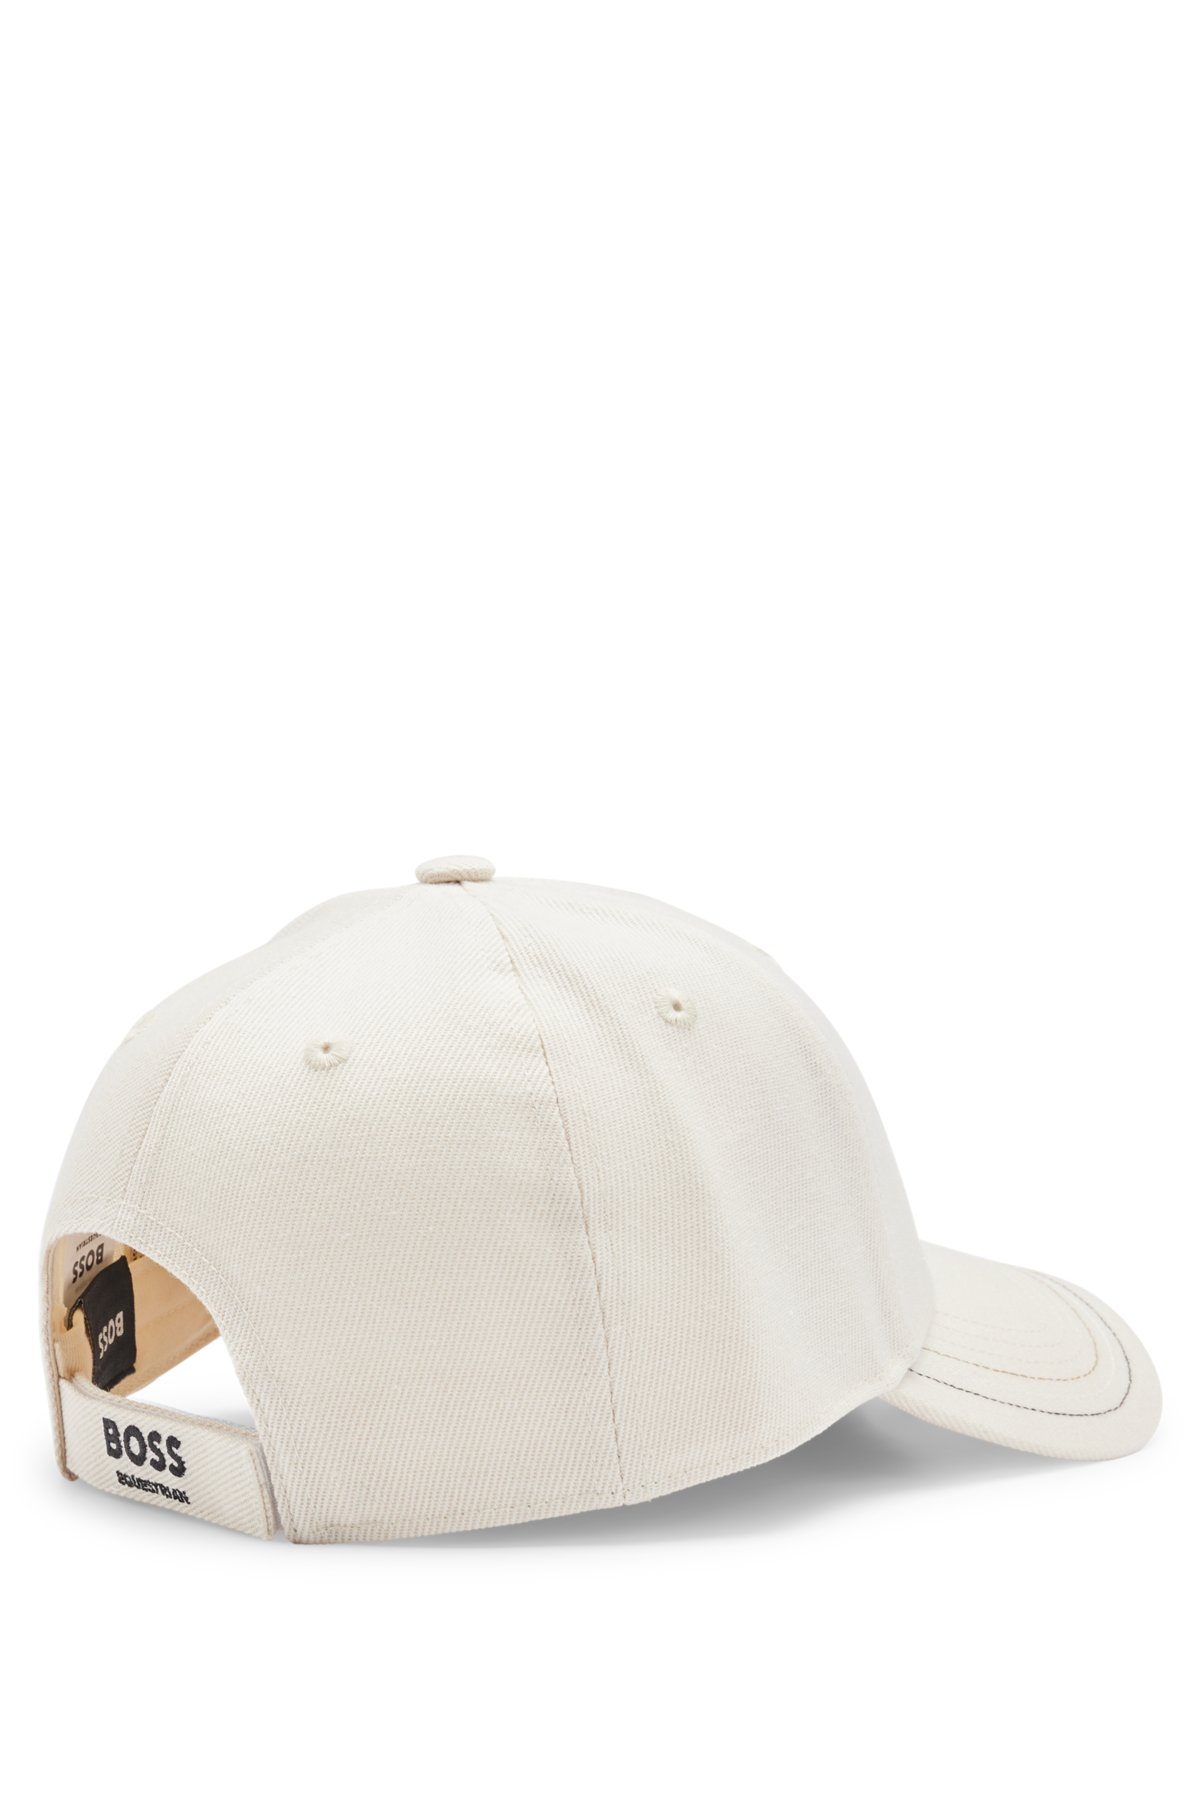 Equestrian cap five-panel details logo - with BOSS